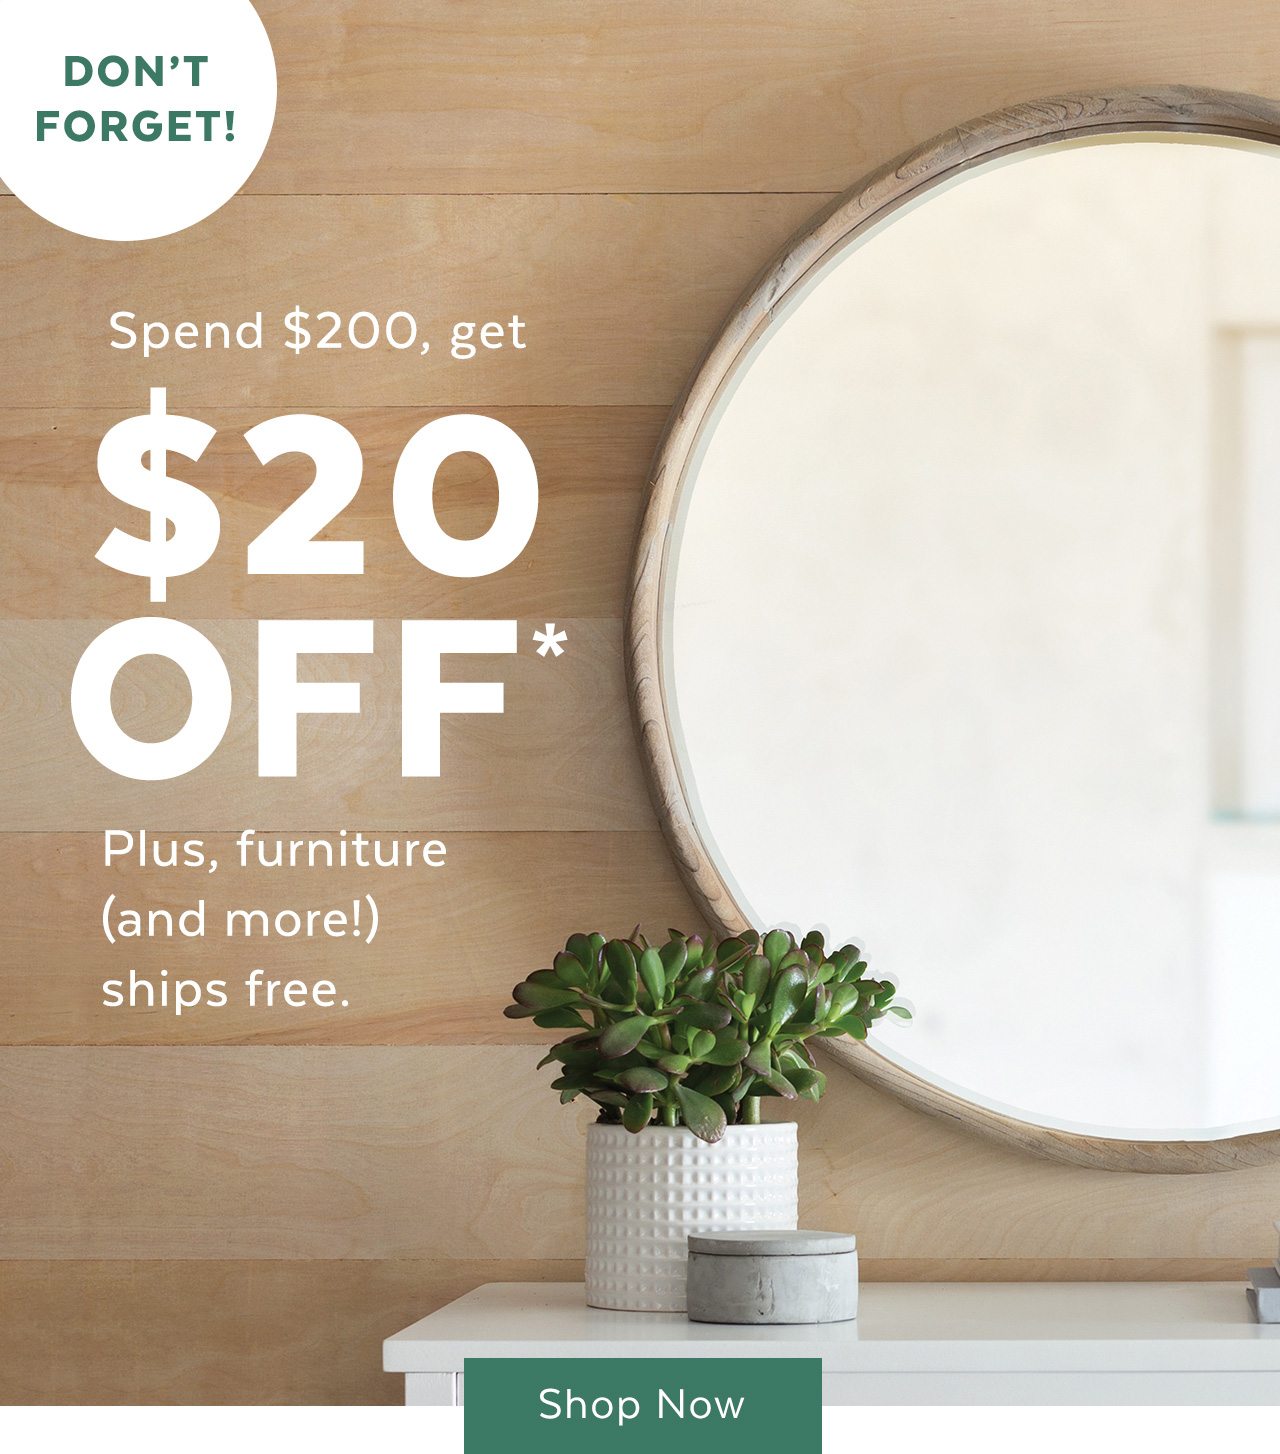 Don’t forget! Spend $200, get $20 off* plus, furniture (and more!) ships free. Shop now